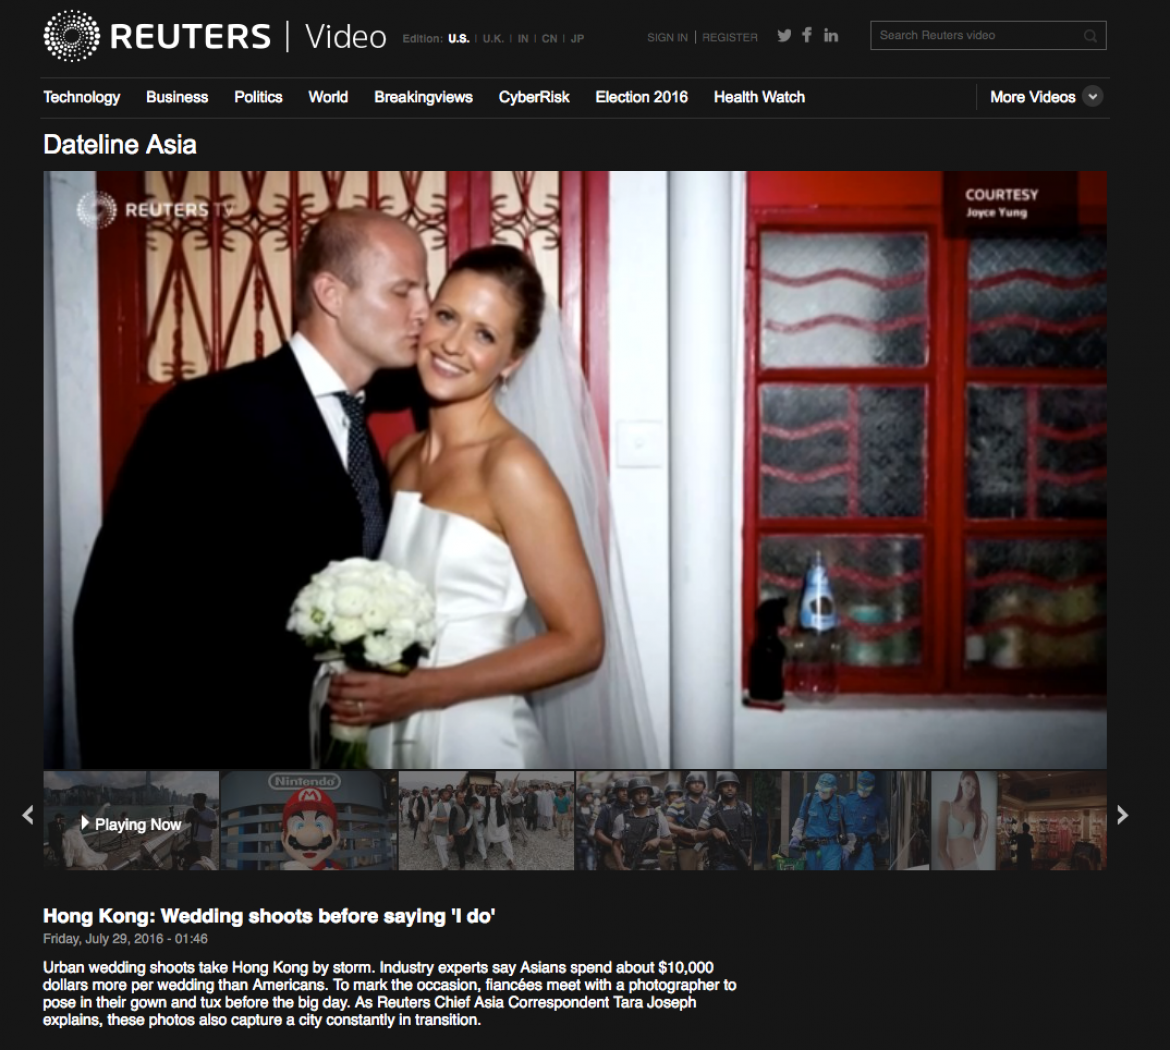 Joyce Yung on Thomas Reuters Video feature about Hong Kong engagement photography